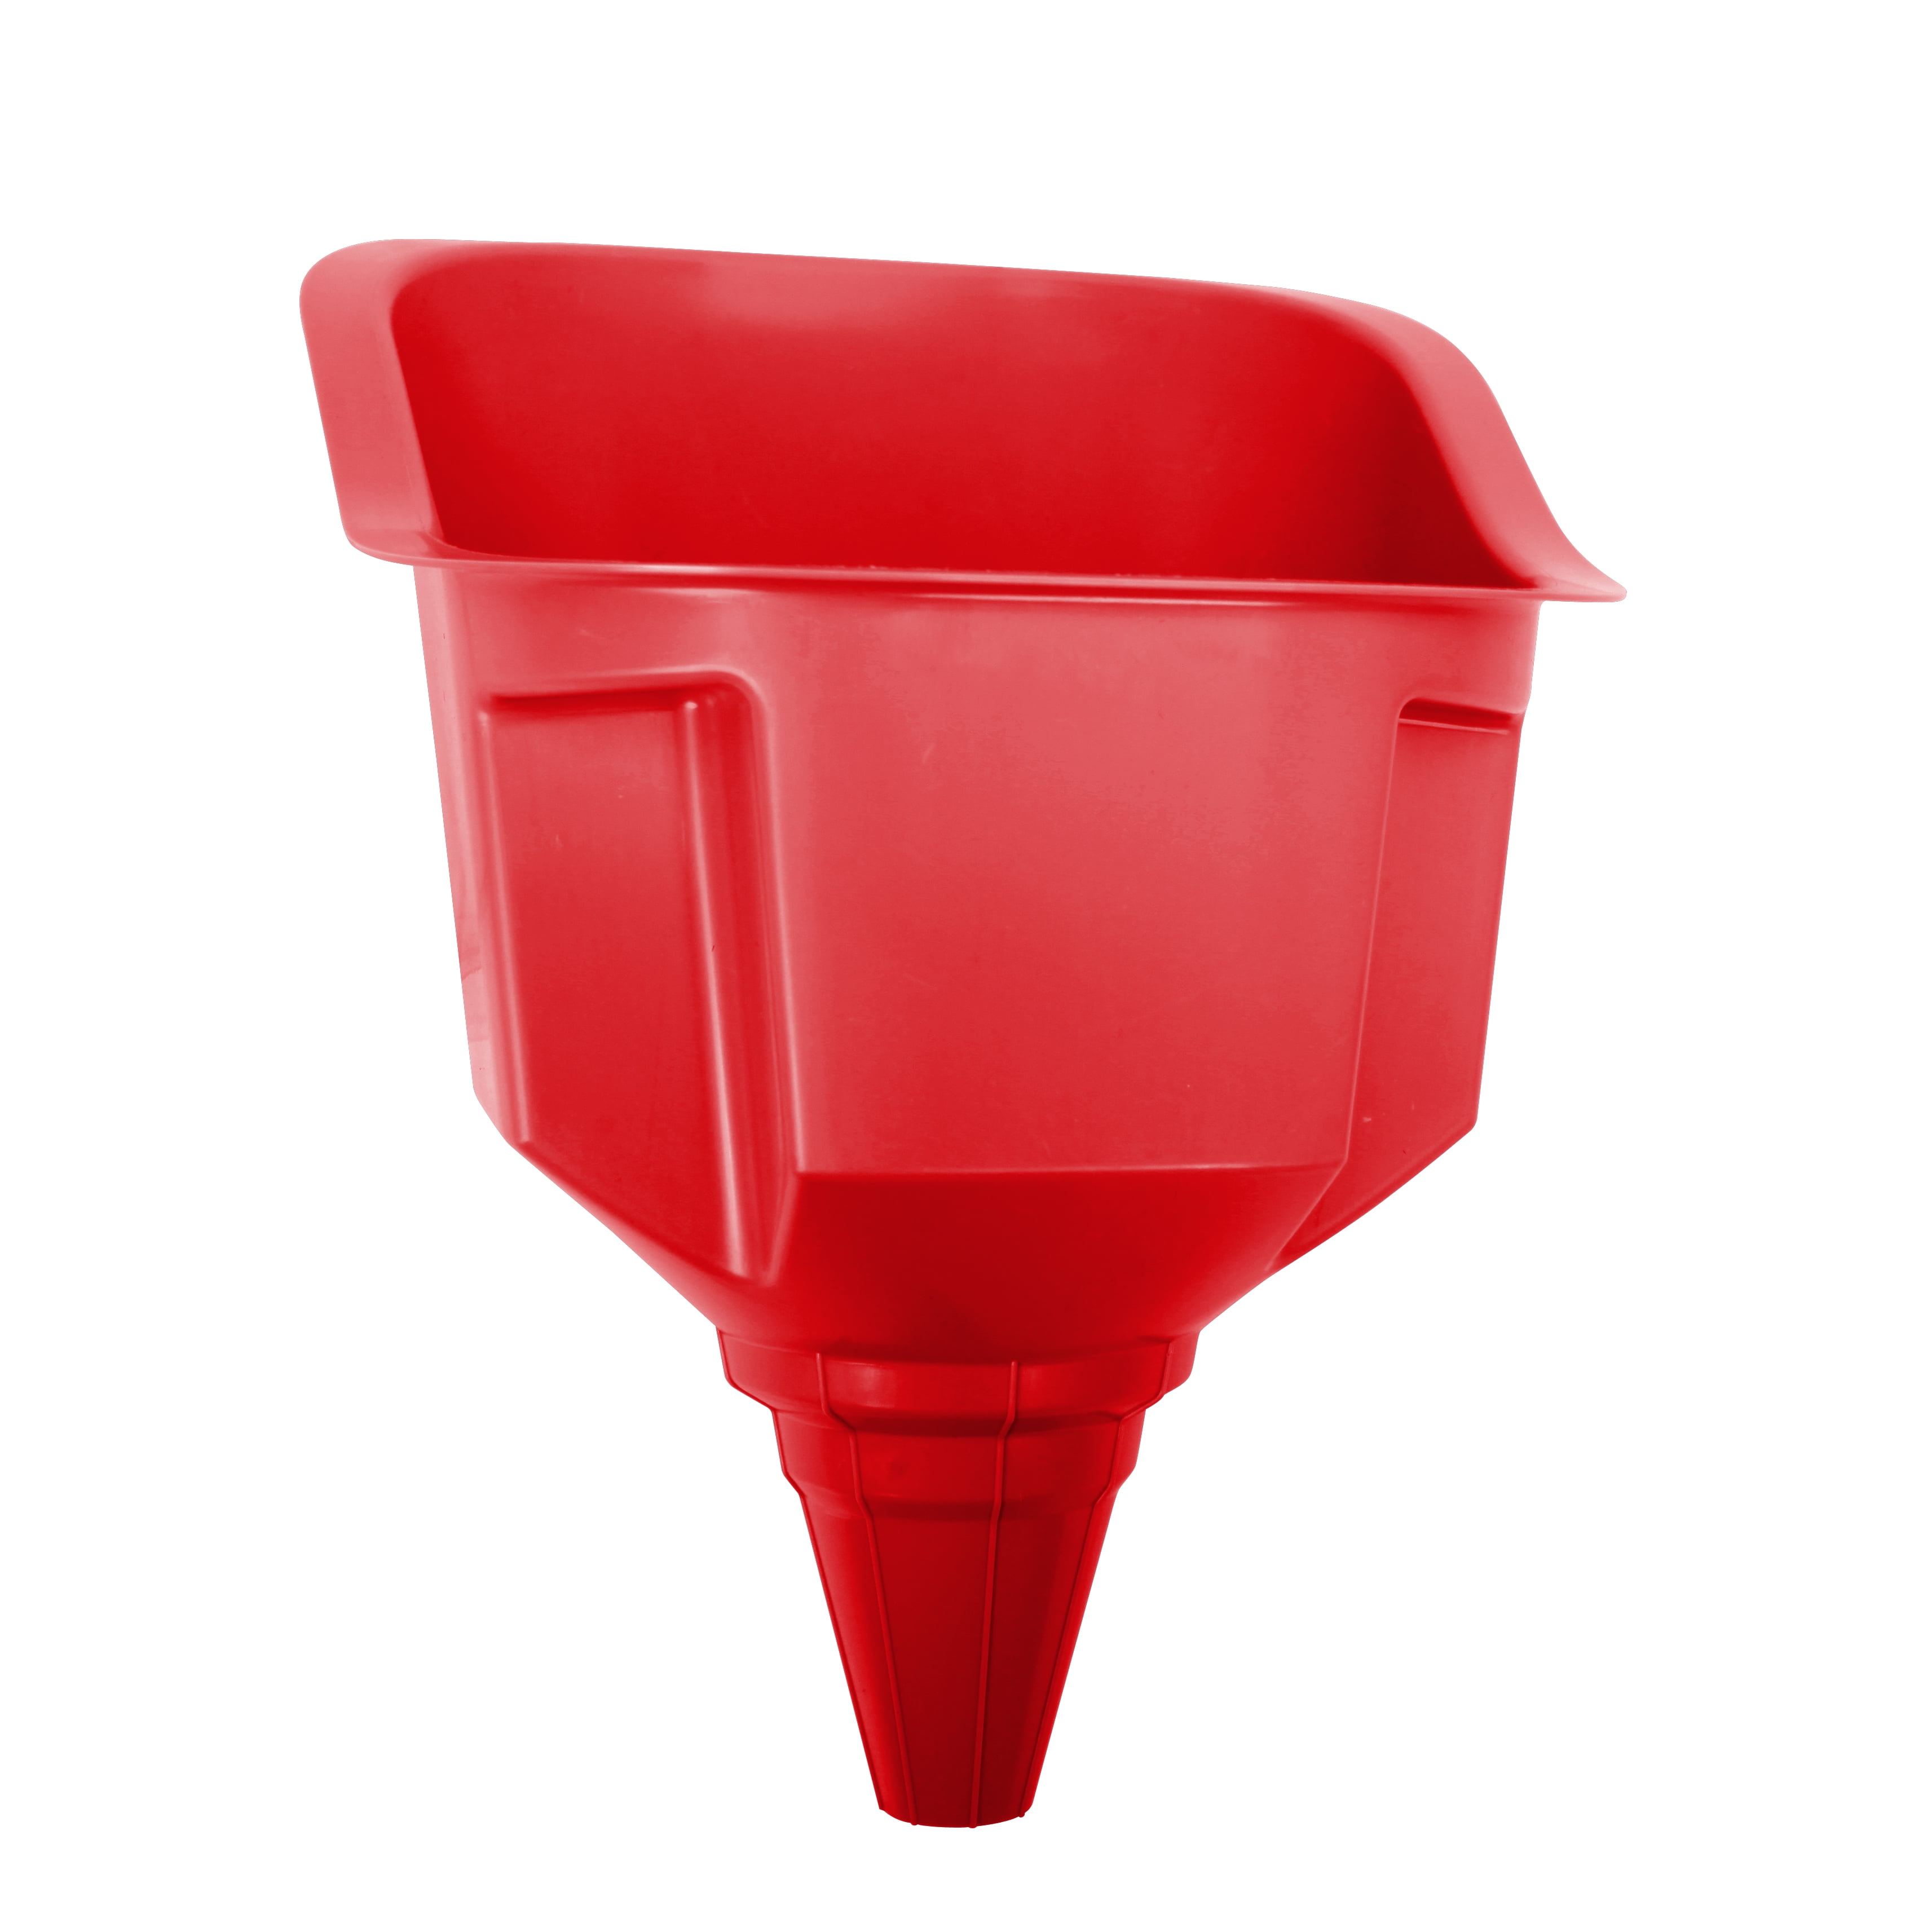 Hyper Tough Large Multi-Use Plastic Truck and Vehicle Funnel, Red